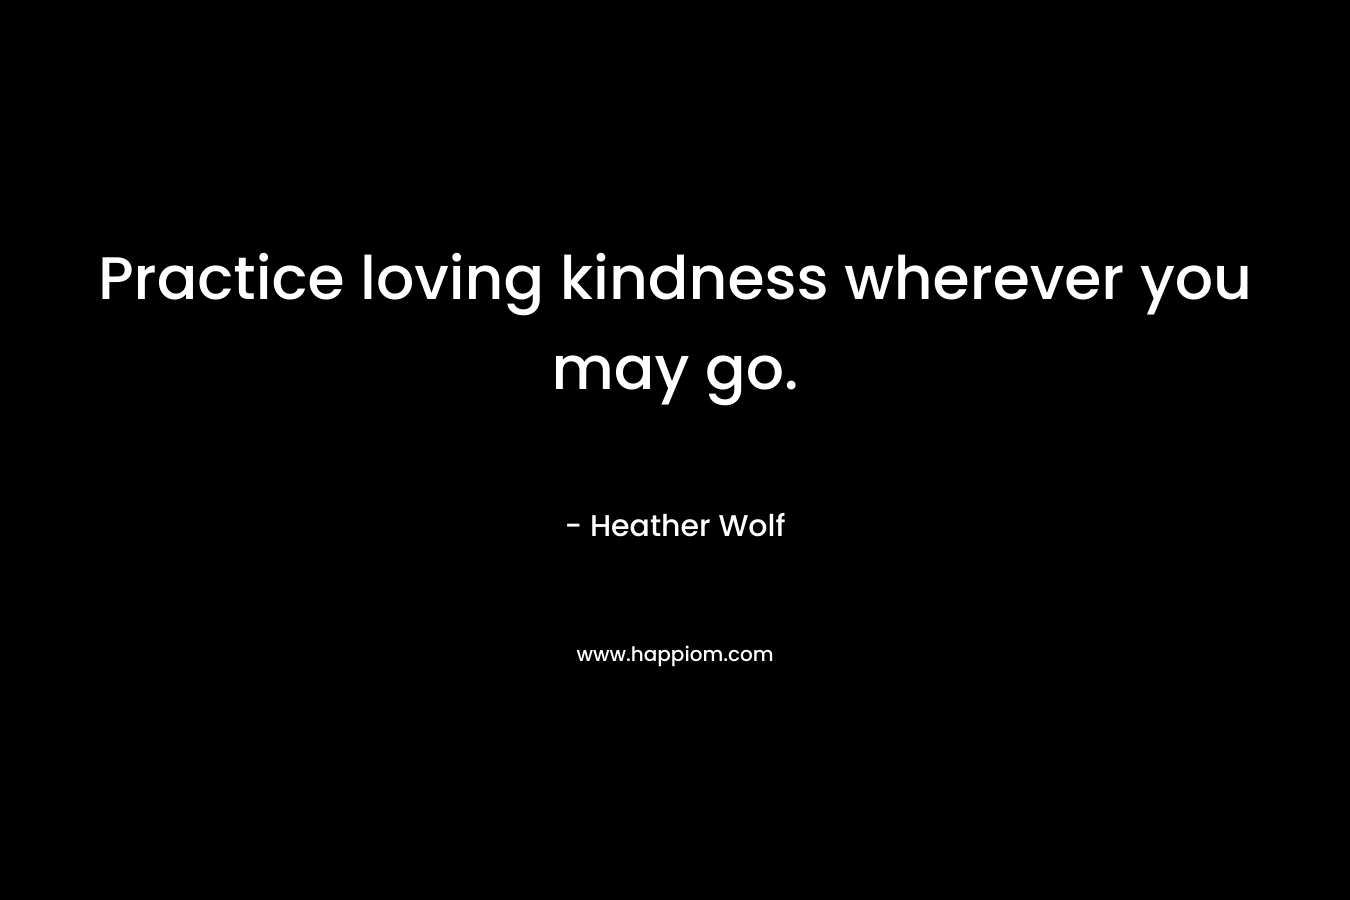 Practice loving kindness wherever you may go.